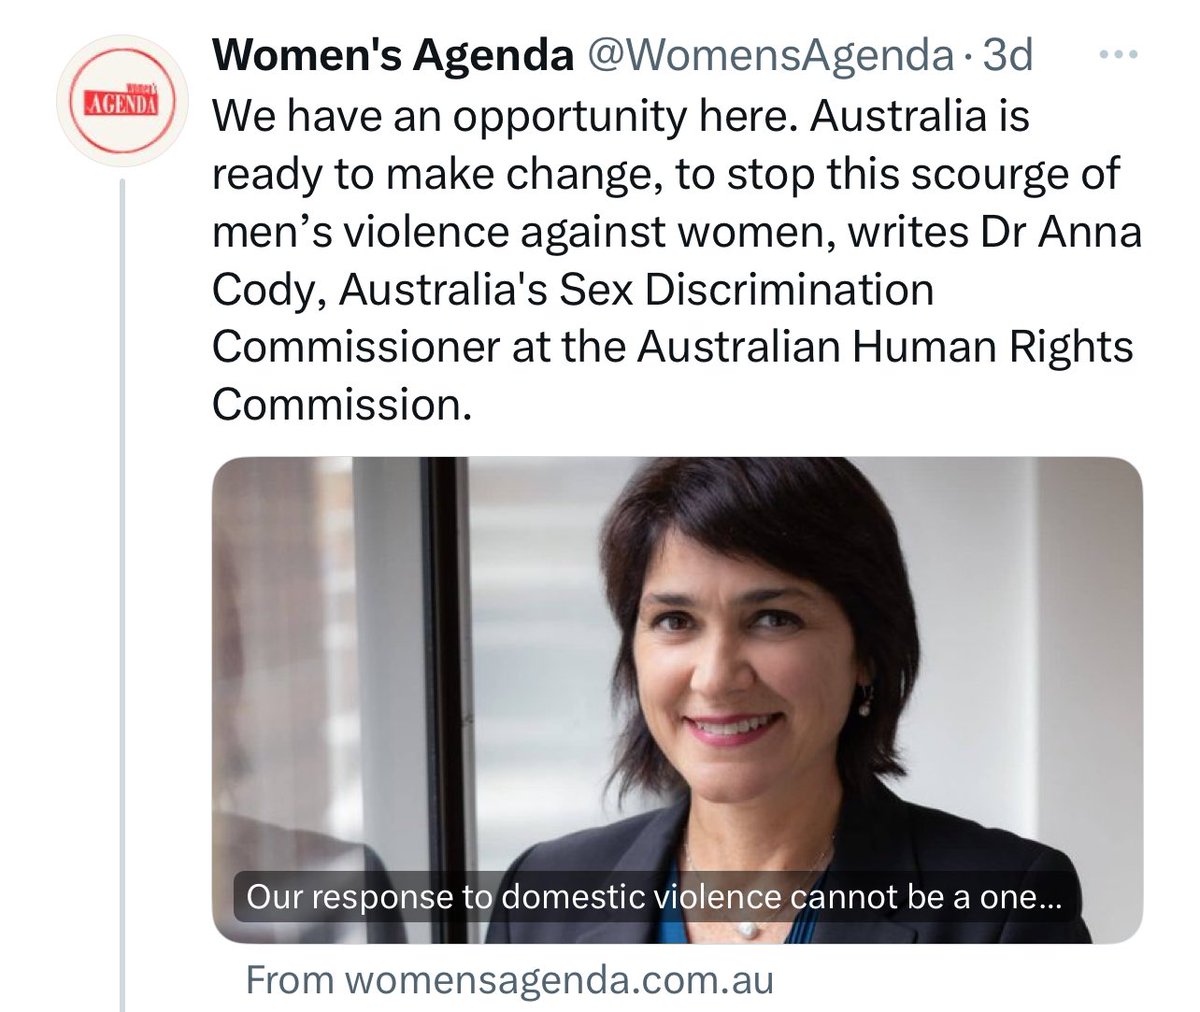 In Australia’s “what is a woman” court case of Tickle v Giggle, the sex discrimination commissioner is on the side of the man, not my side, and I am the woman. Abuse against woman comes in lots of different forms. Punishing us for not believing men are women is one of them.